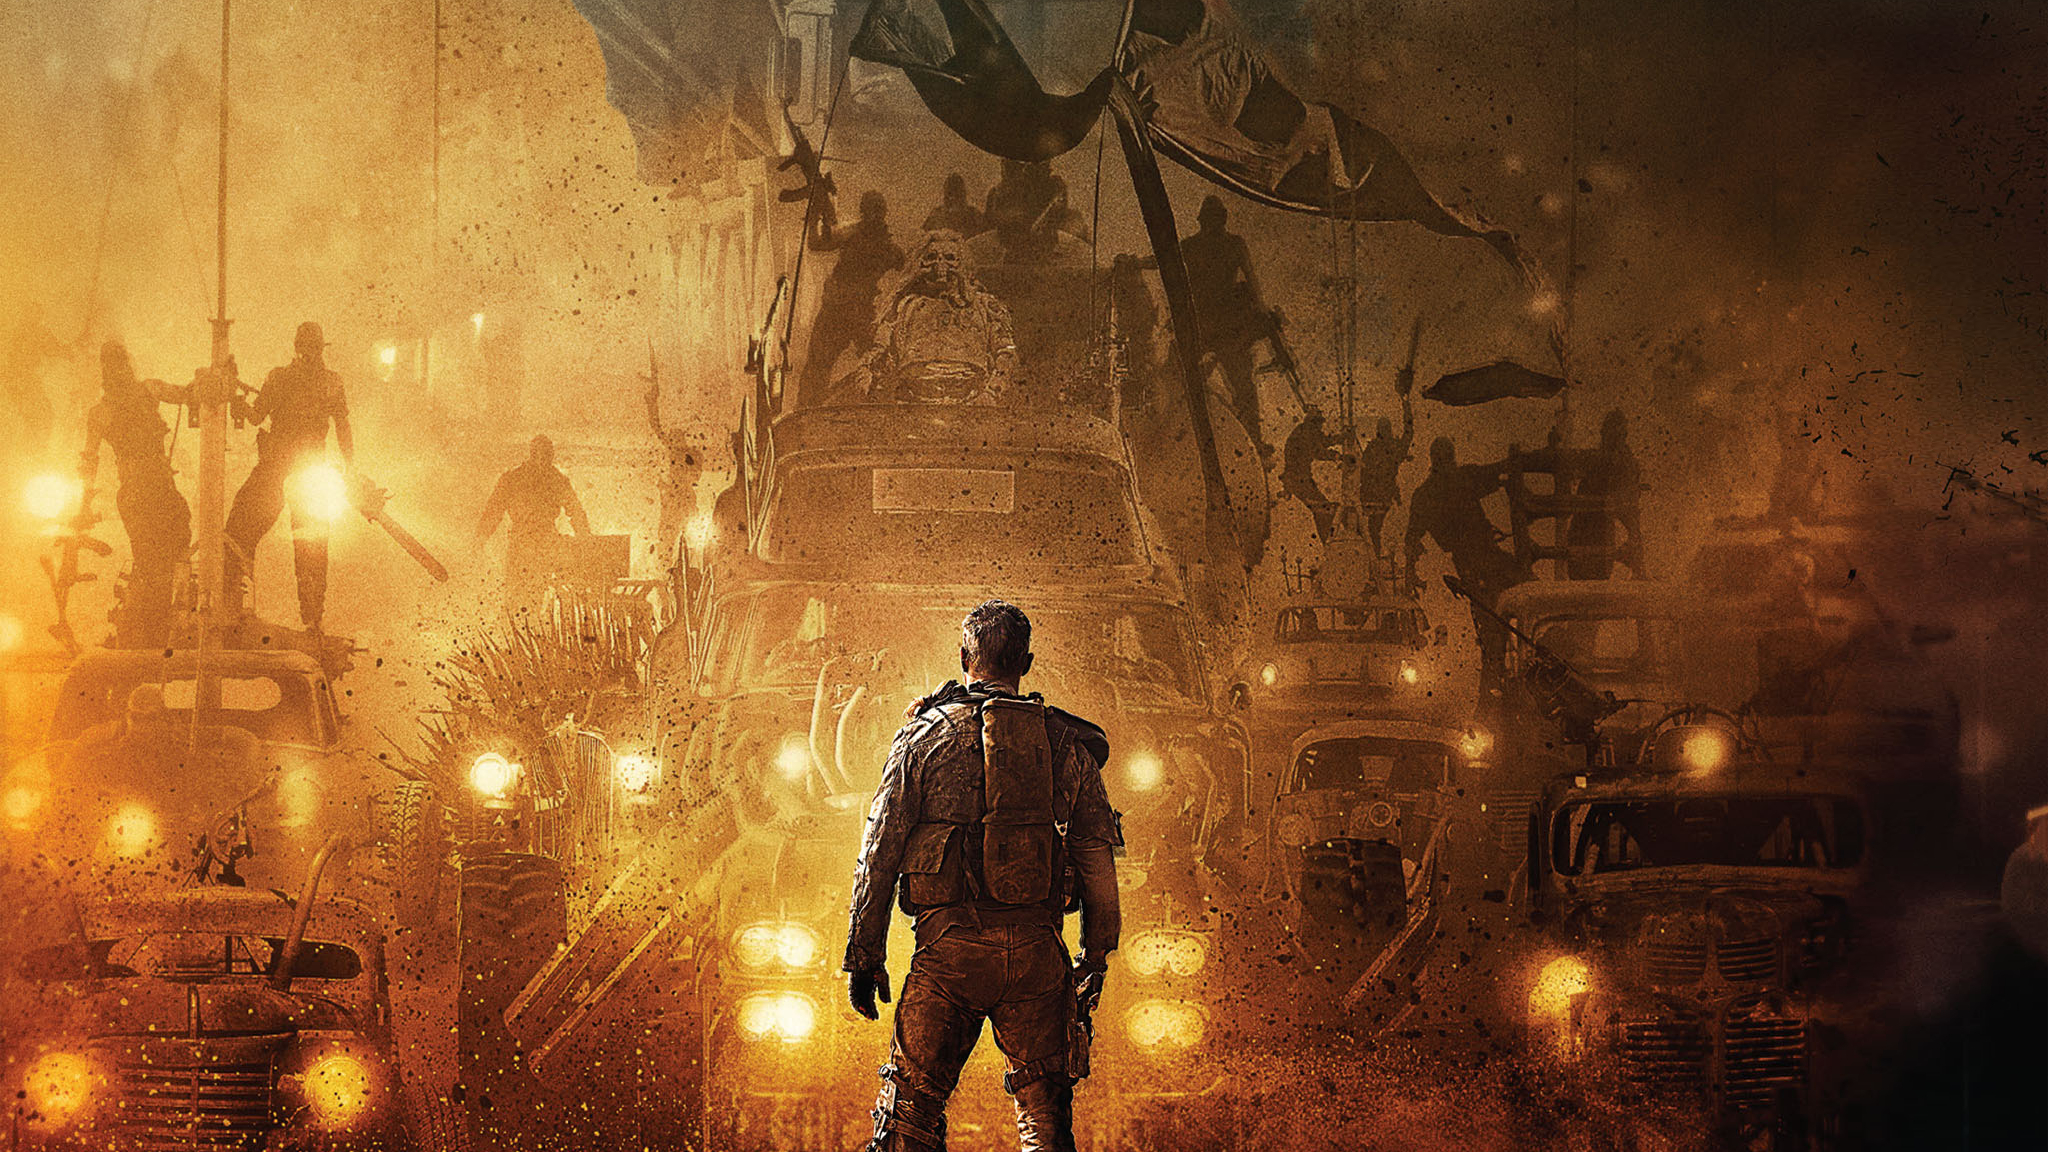 mad max iphone wallpaper,action adventure game,pc game,shooter game,digital compositing,strategy video game